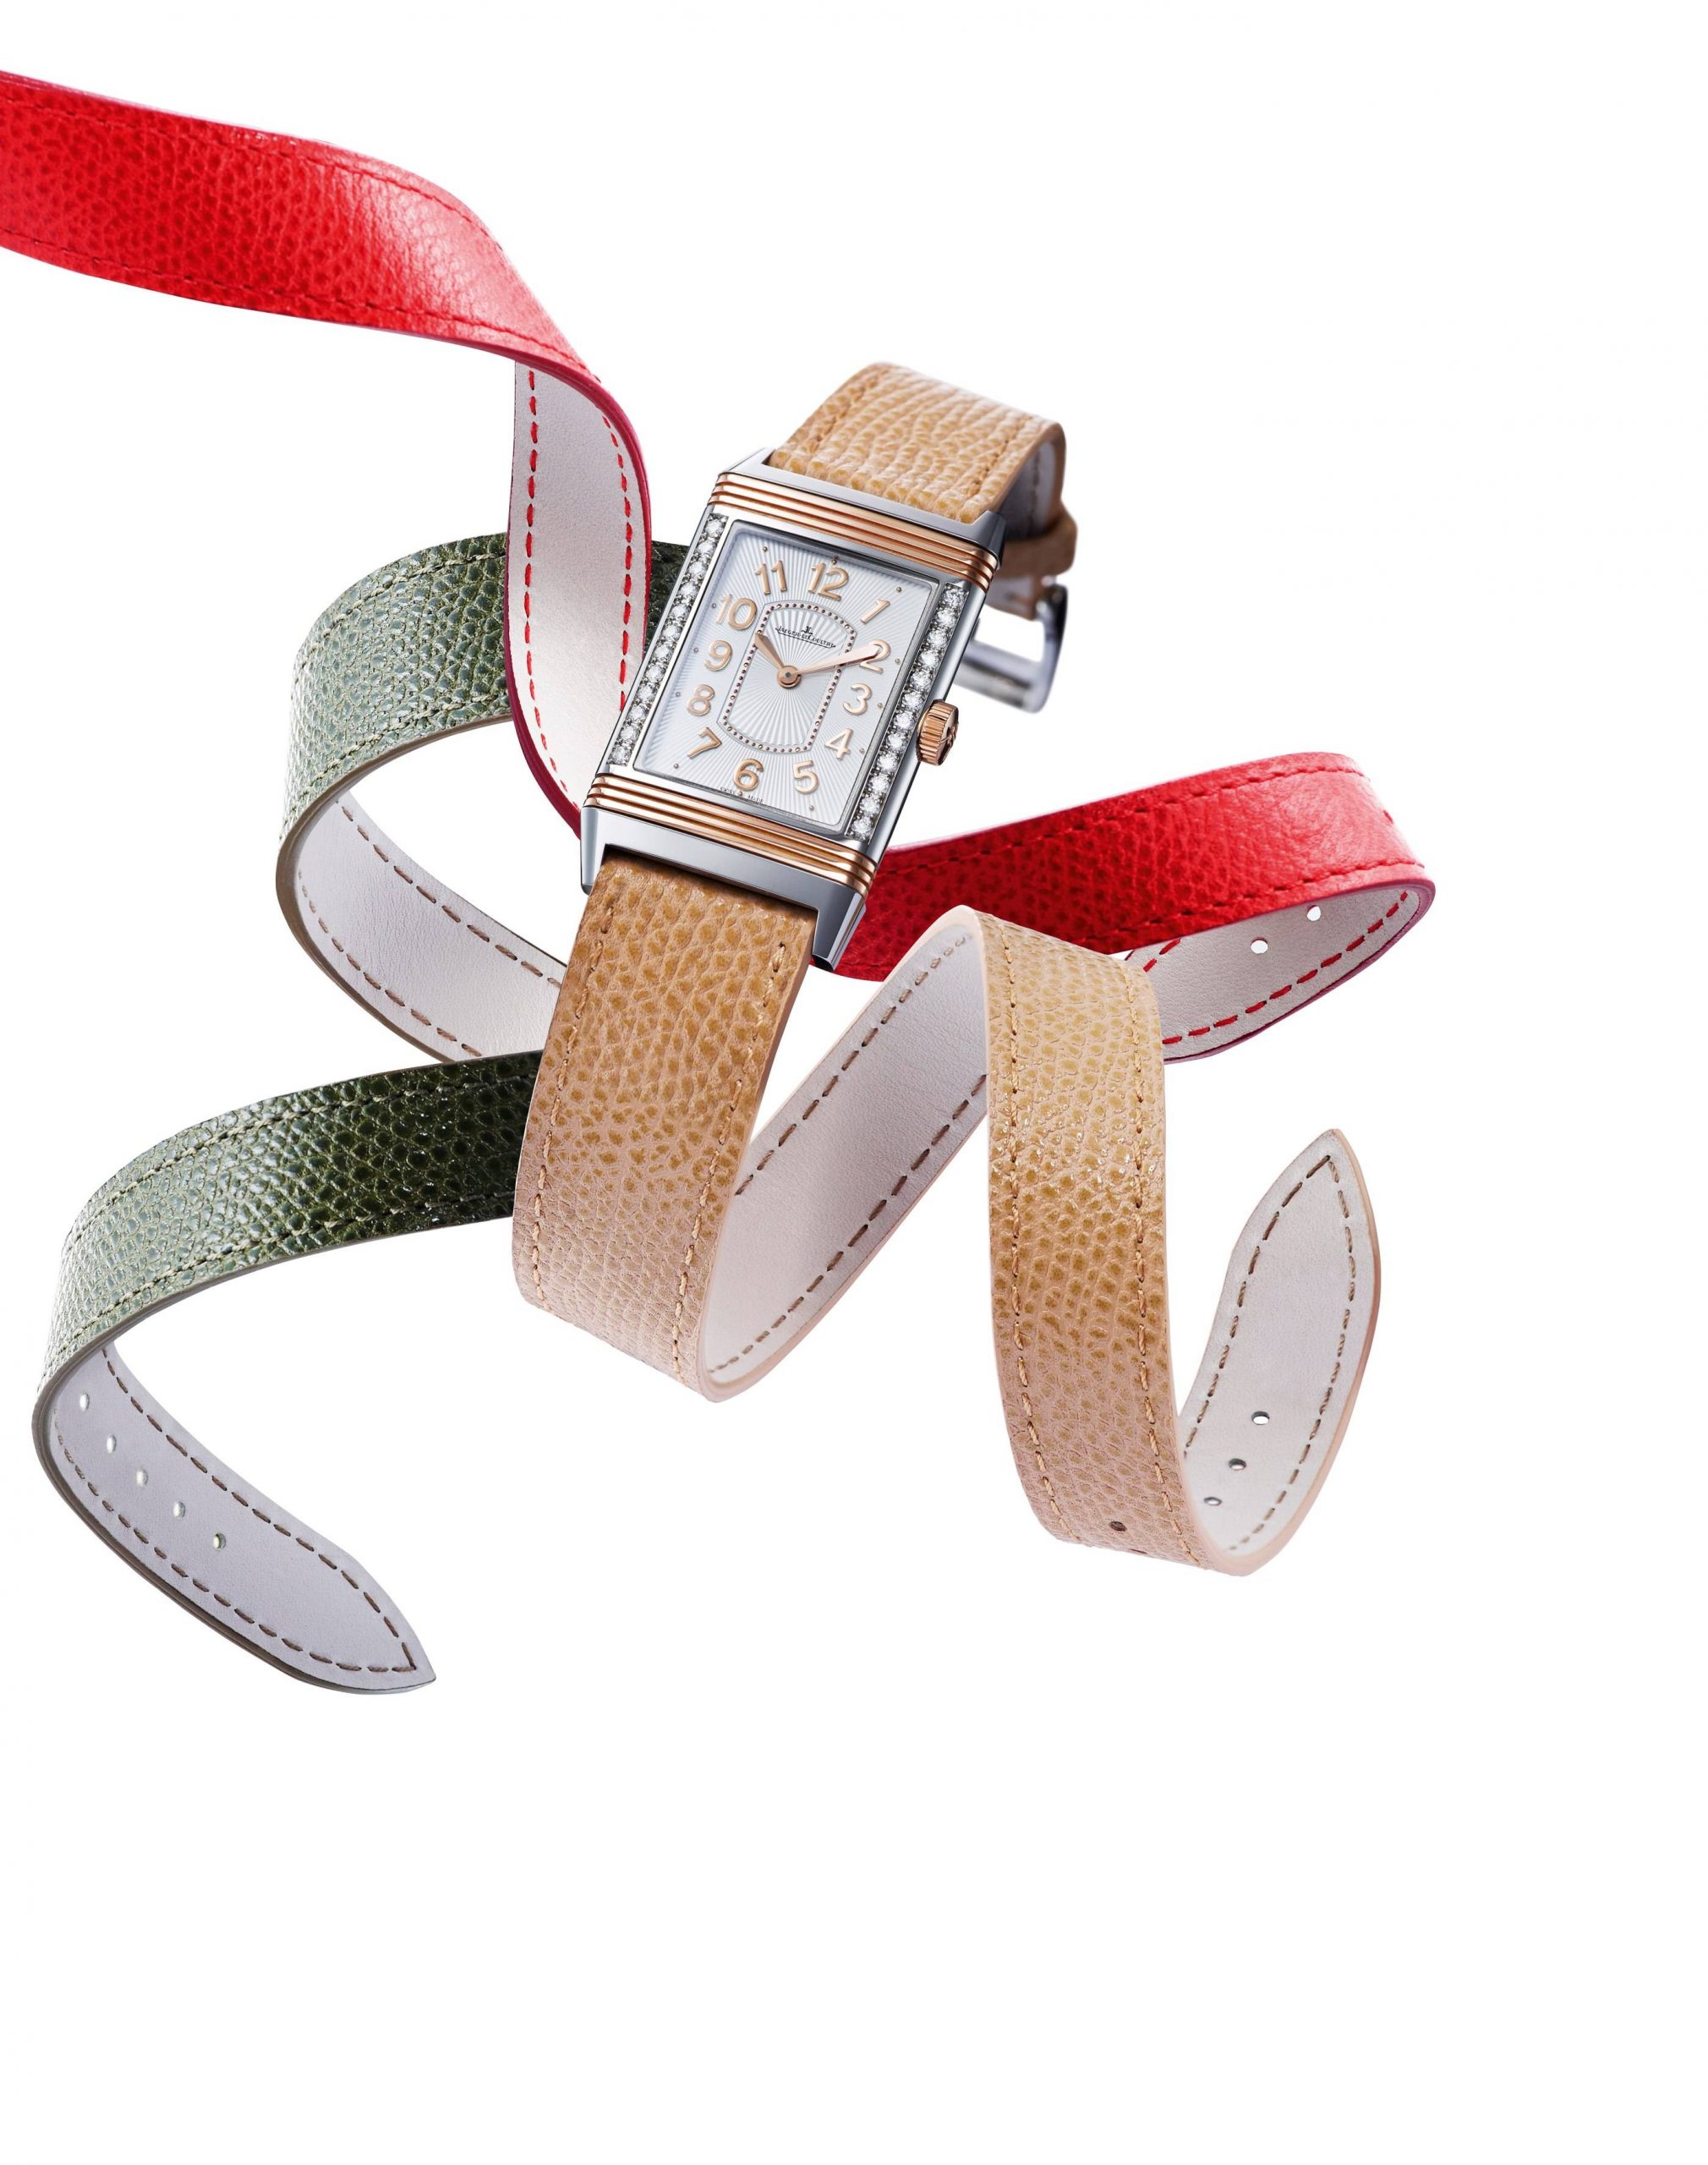 Jaeger-LeCoultre Unveil Limited-Edition Grande Reverso Lady Utra Thin for Valentine’s Day